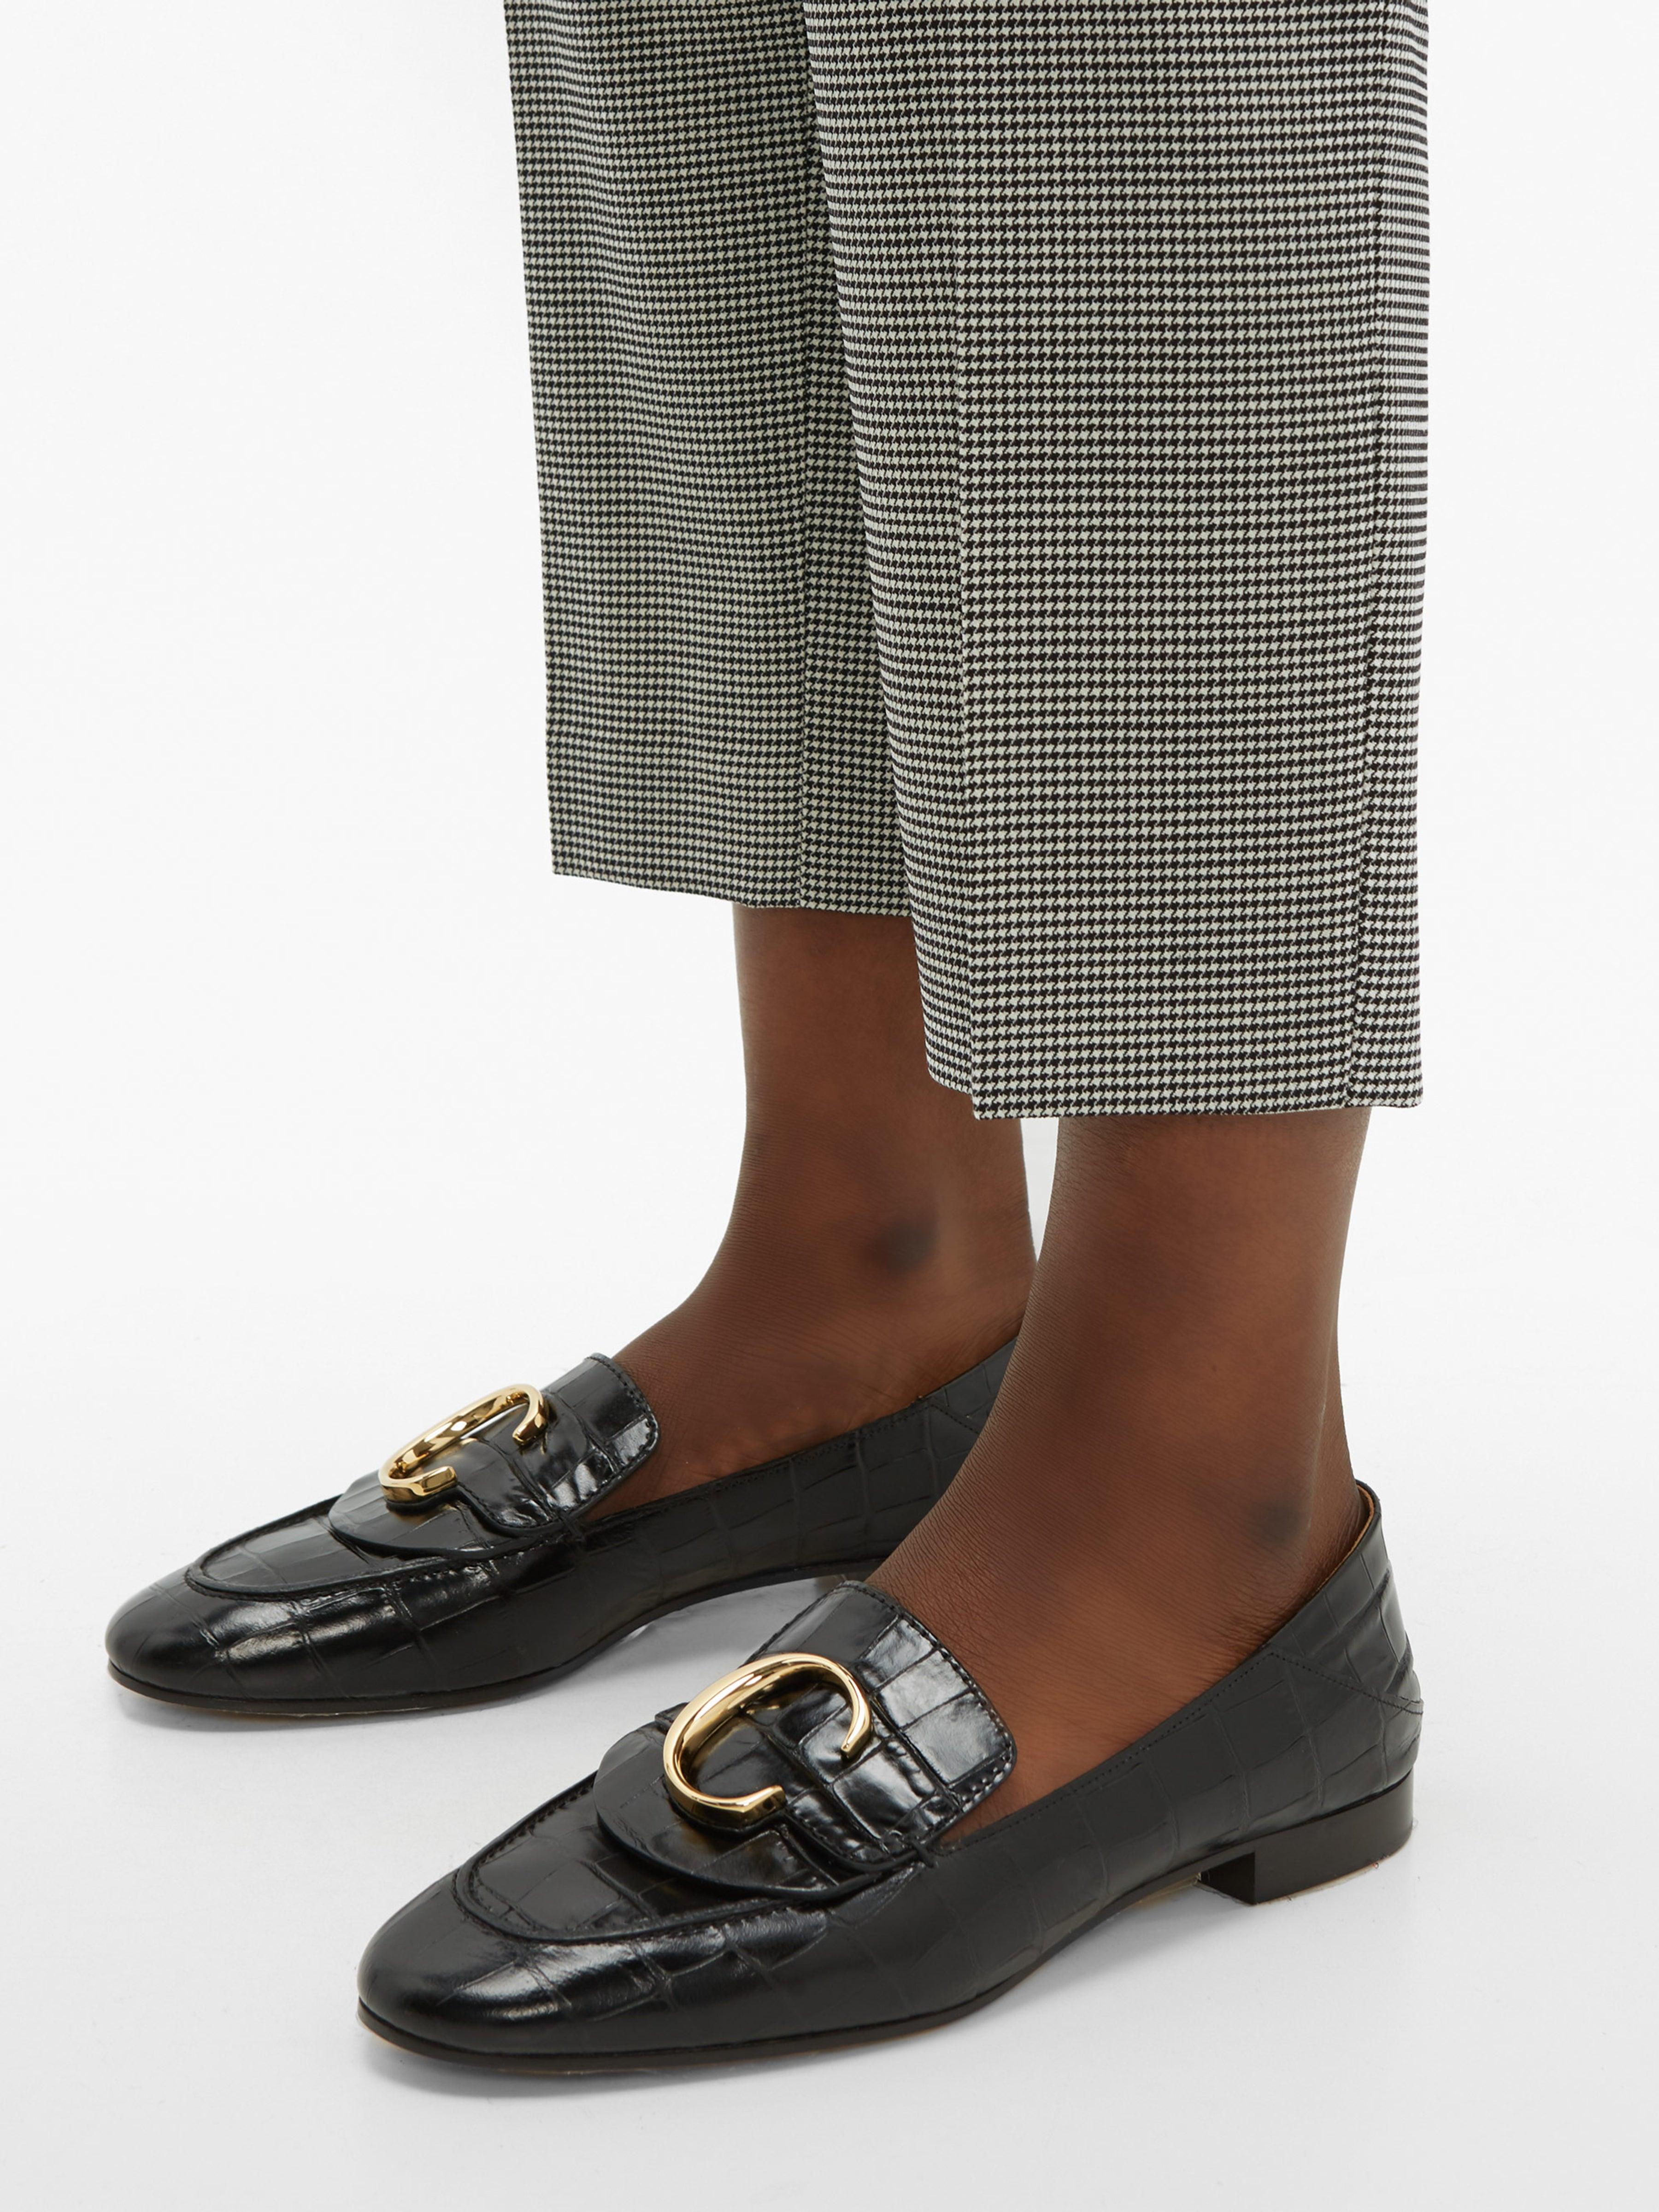 Chloé The C Crocodile Effect Leather Loafers in Black - Lyst